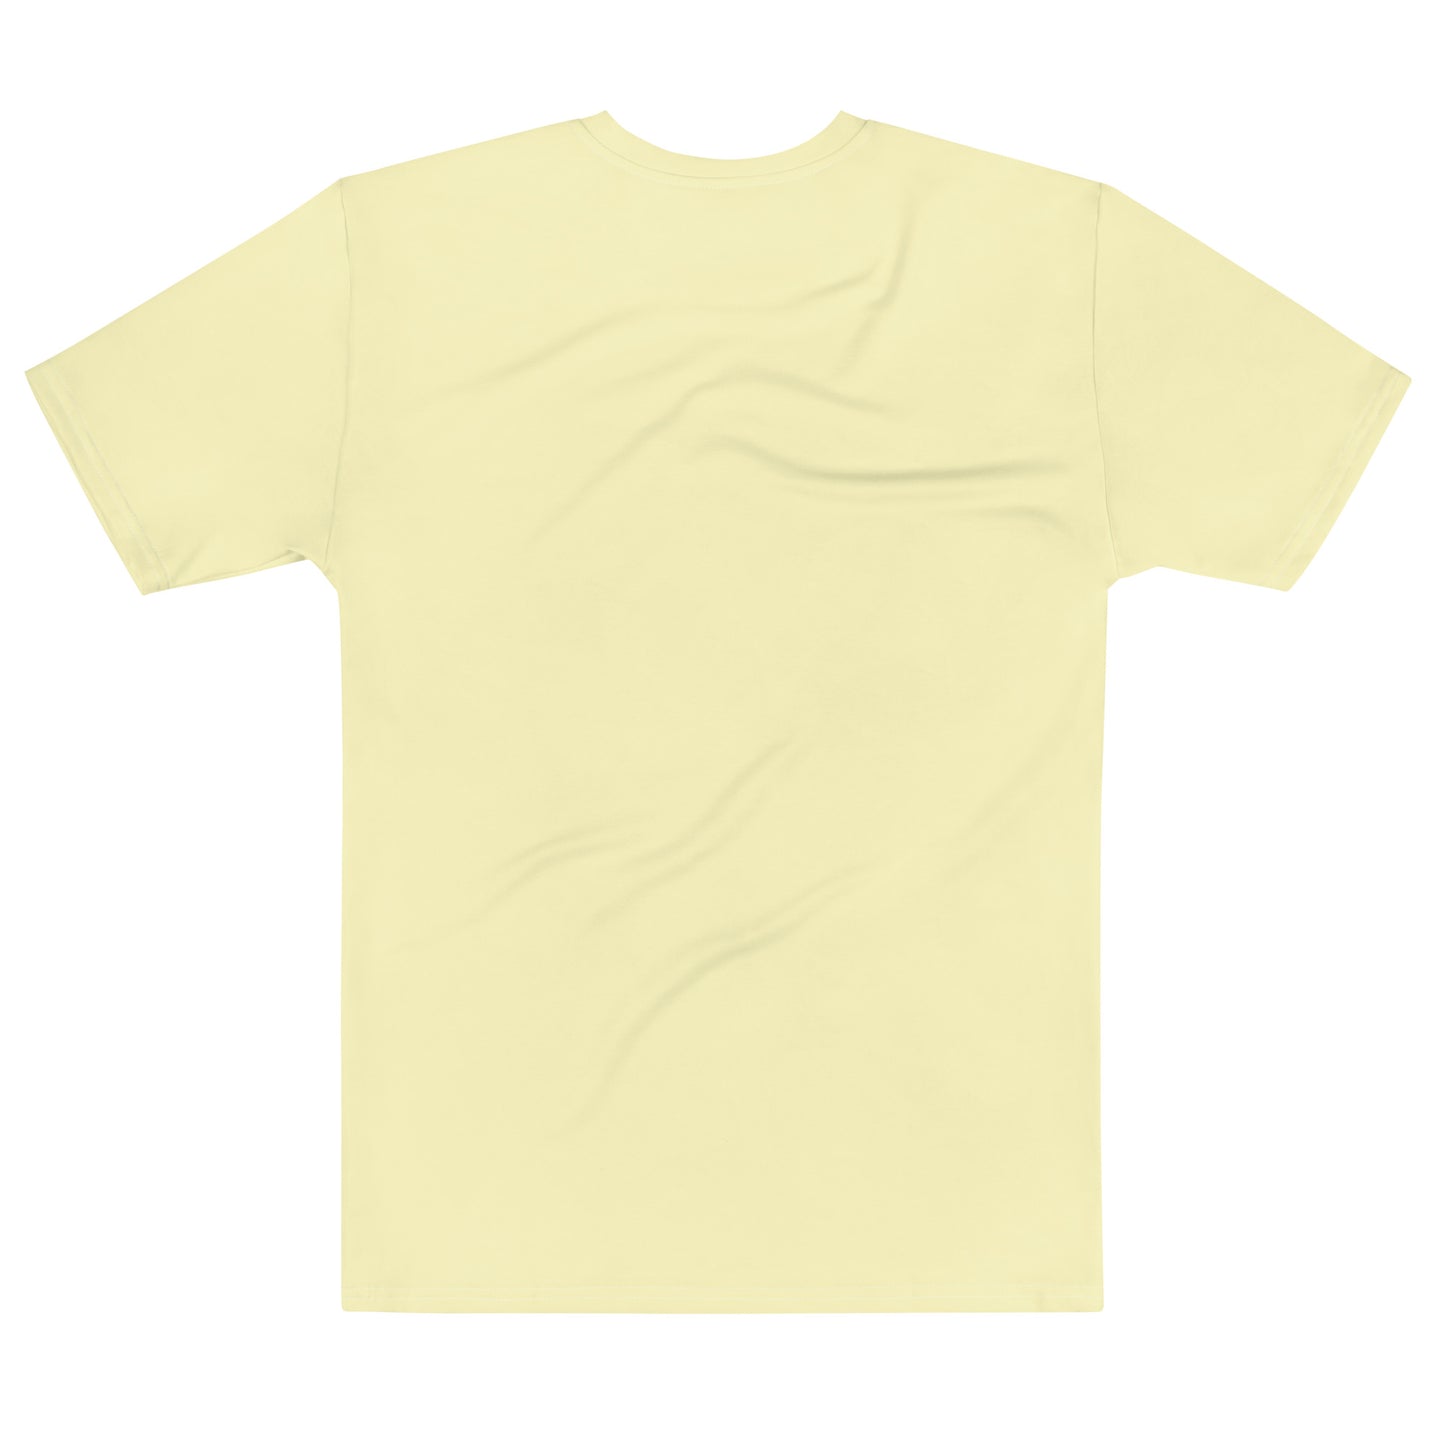 Whinger - Sustainably Made Men's Short Sleeve Tee